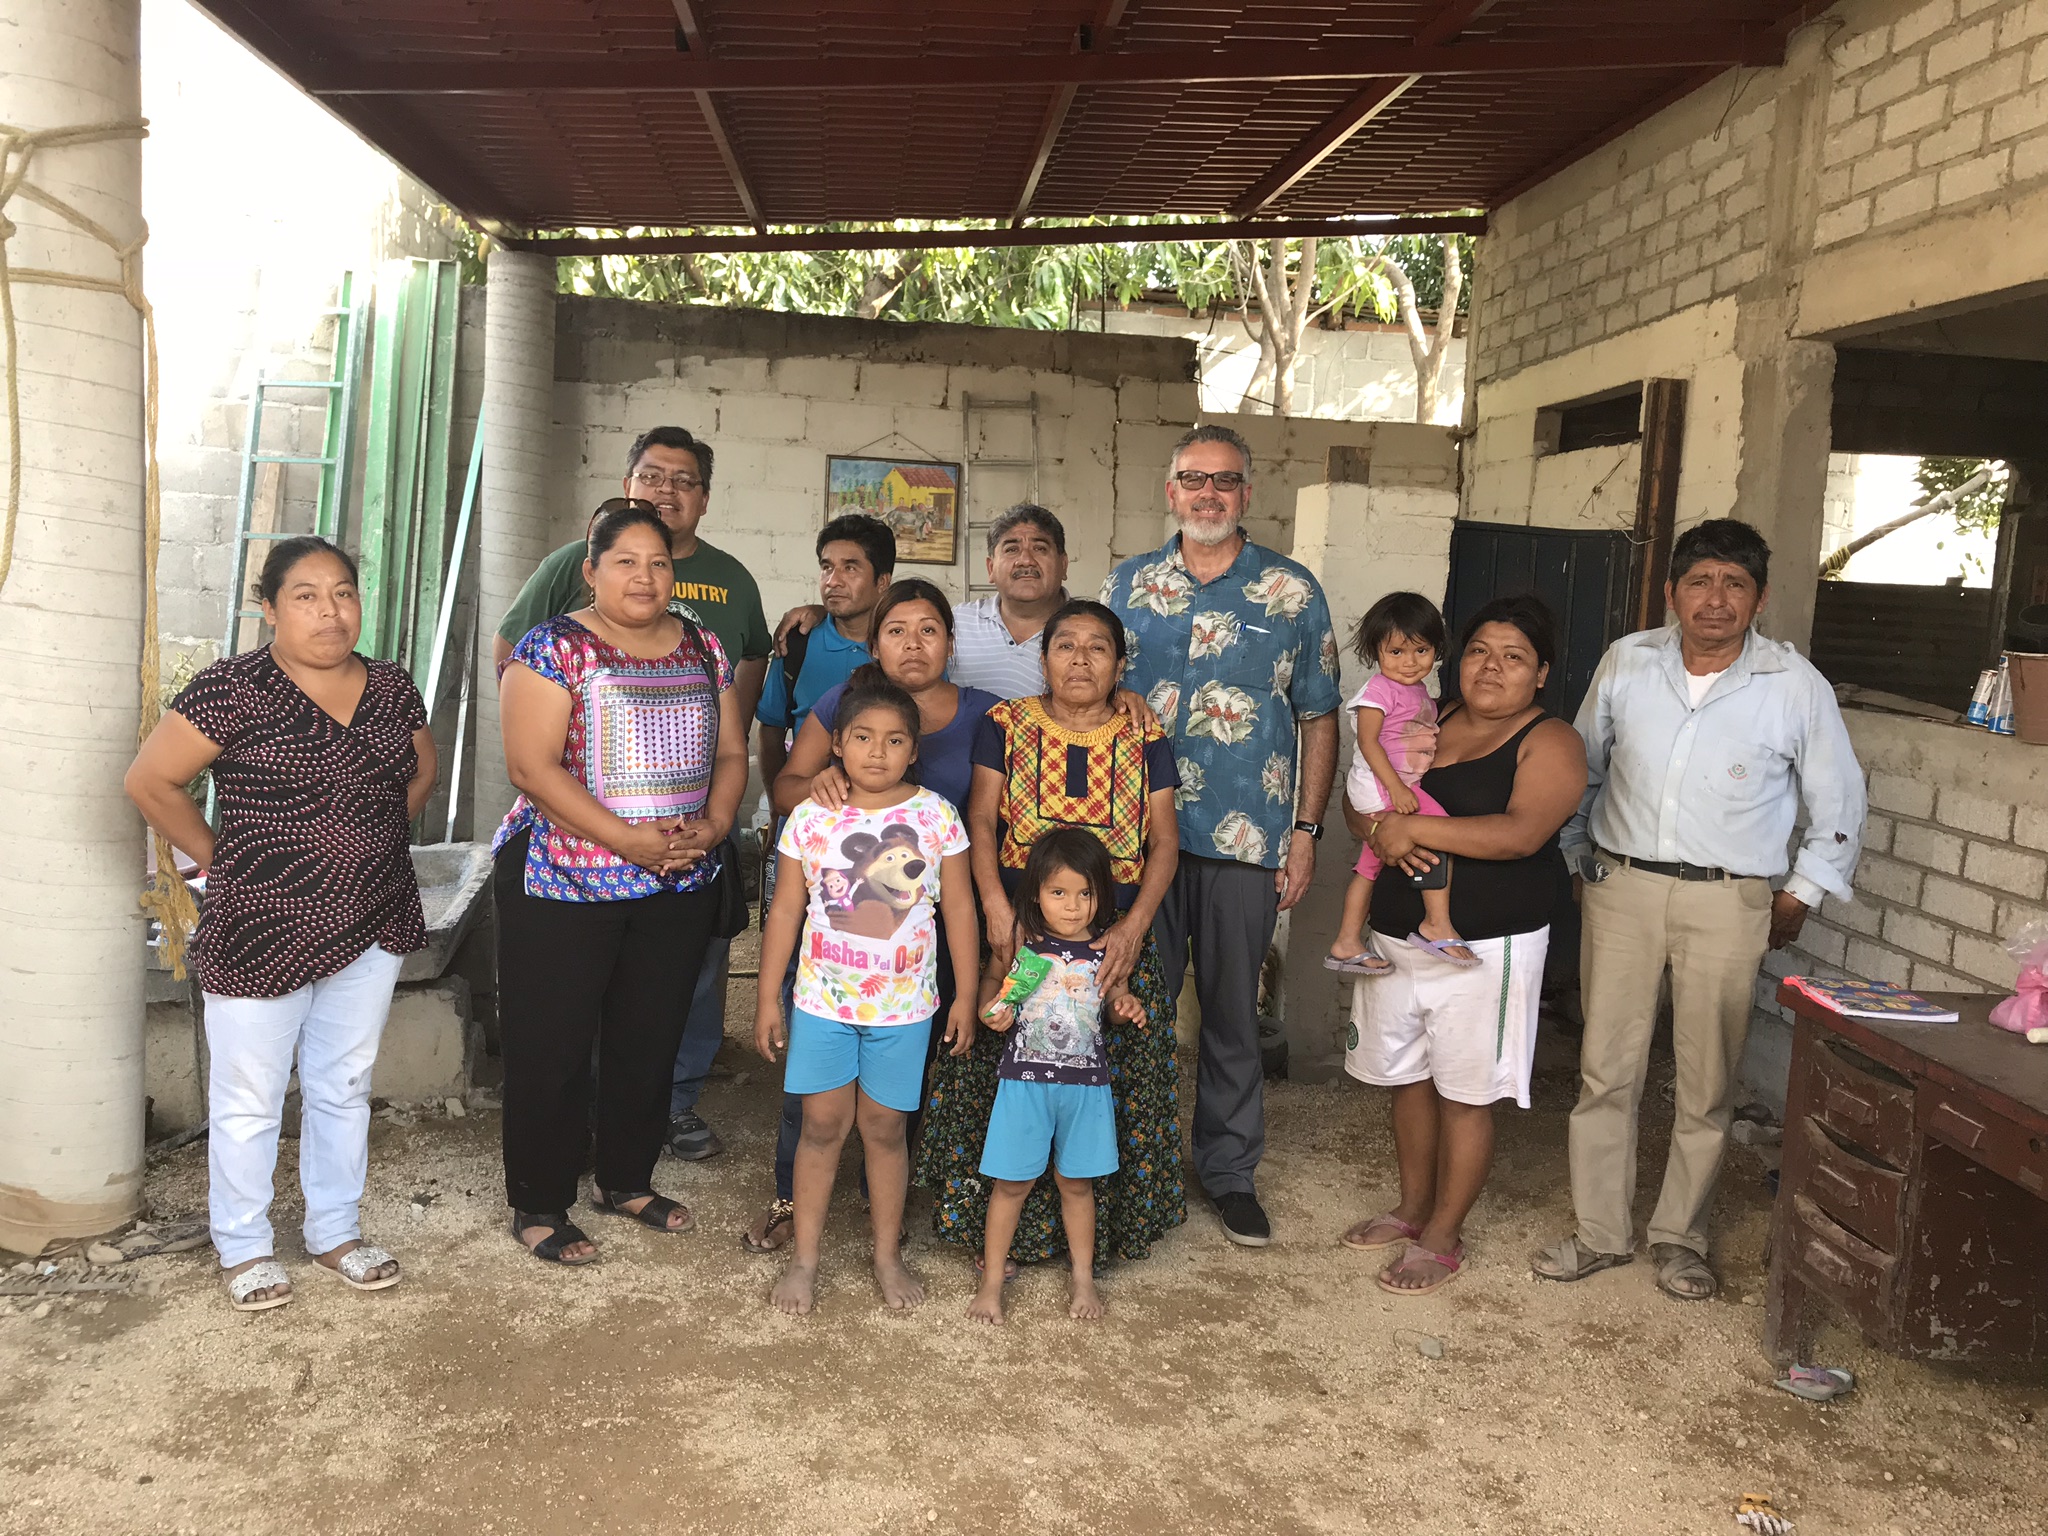 Some of the people I met in Ixtepec from one of the churches